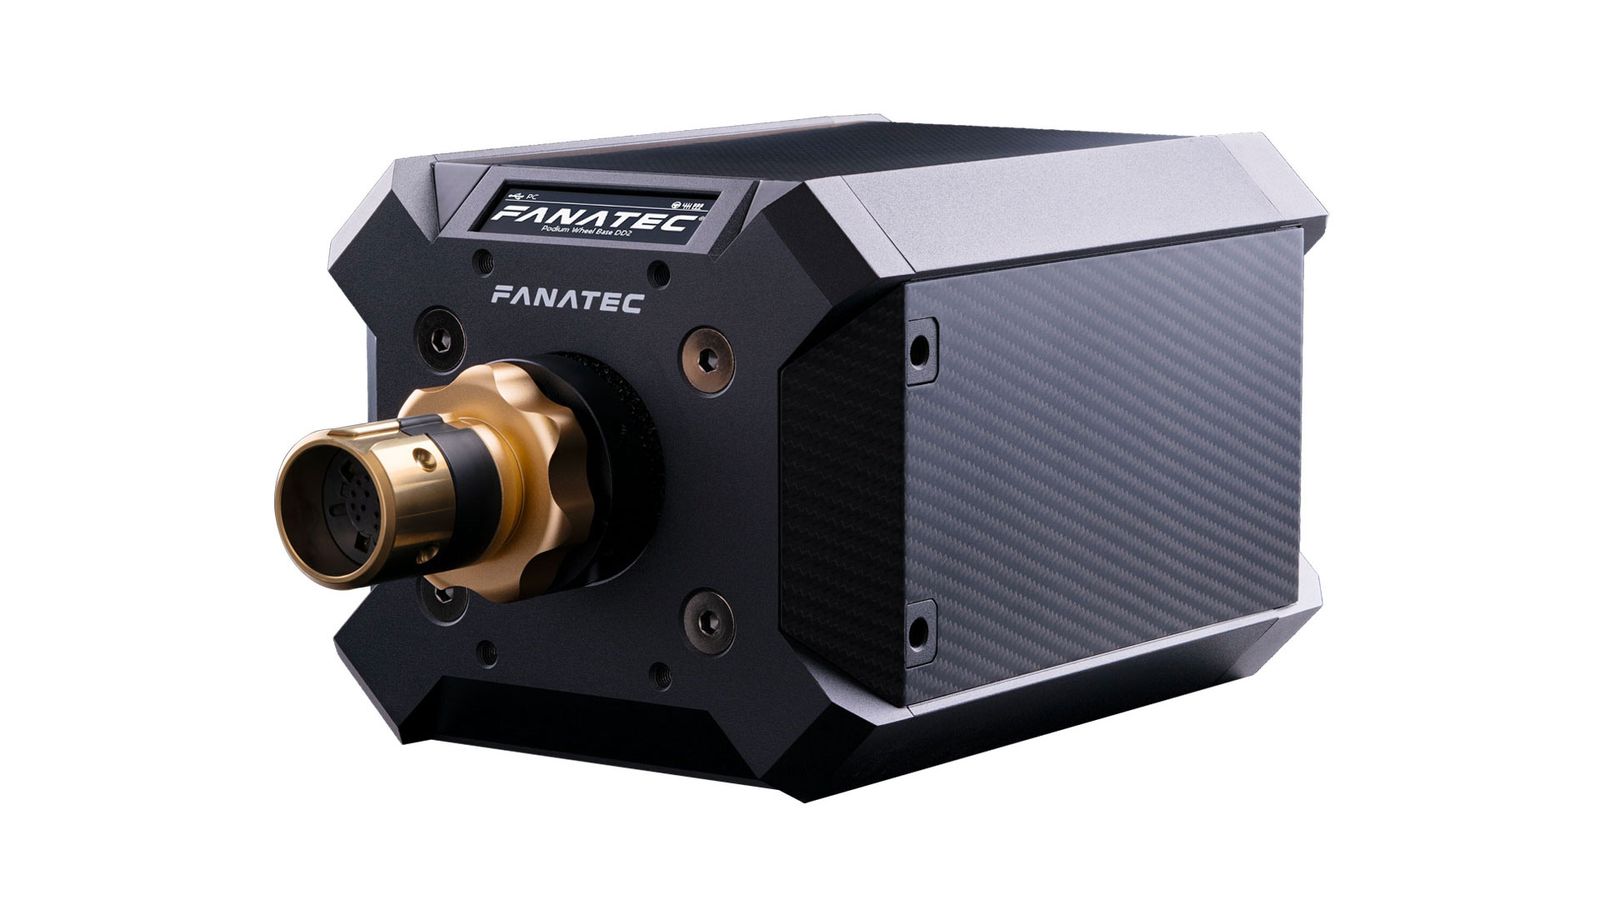 Fanatec Podium DD2 product image of a black unit with white Fanatec branding and a gold connector.